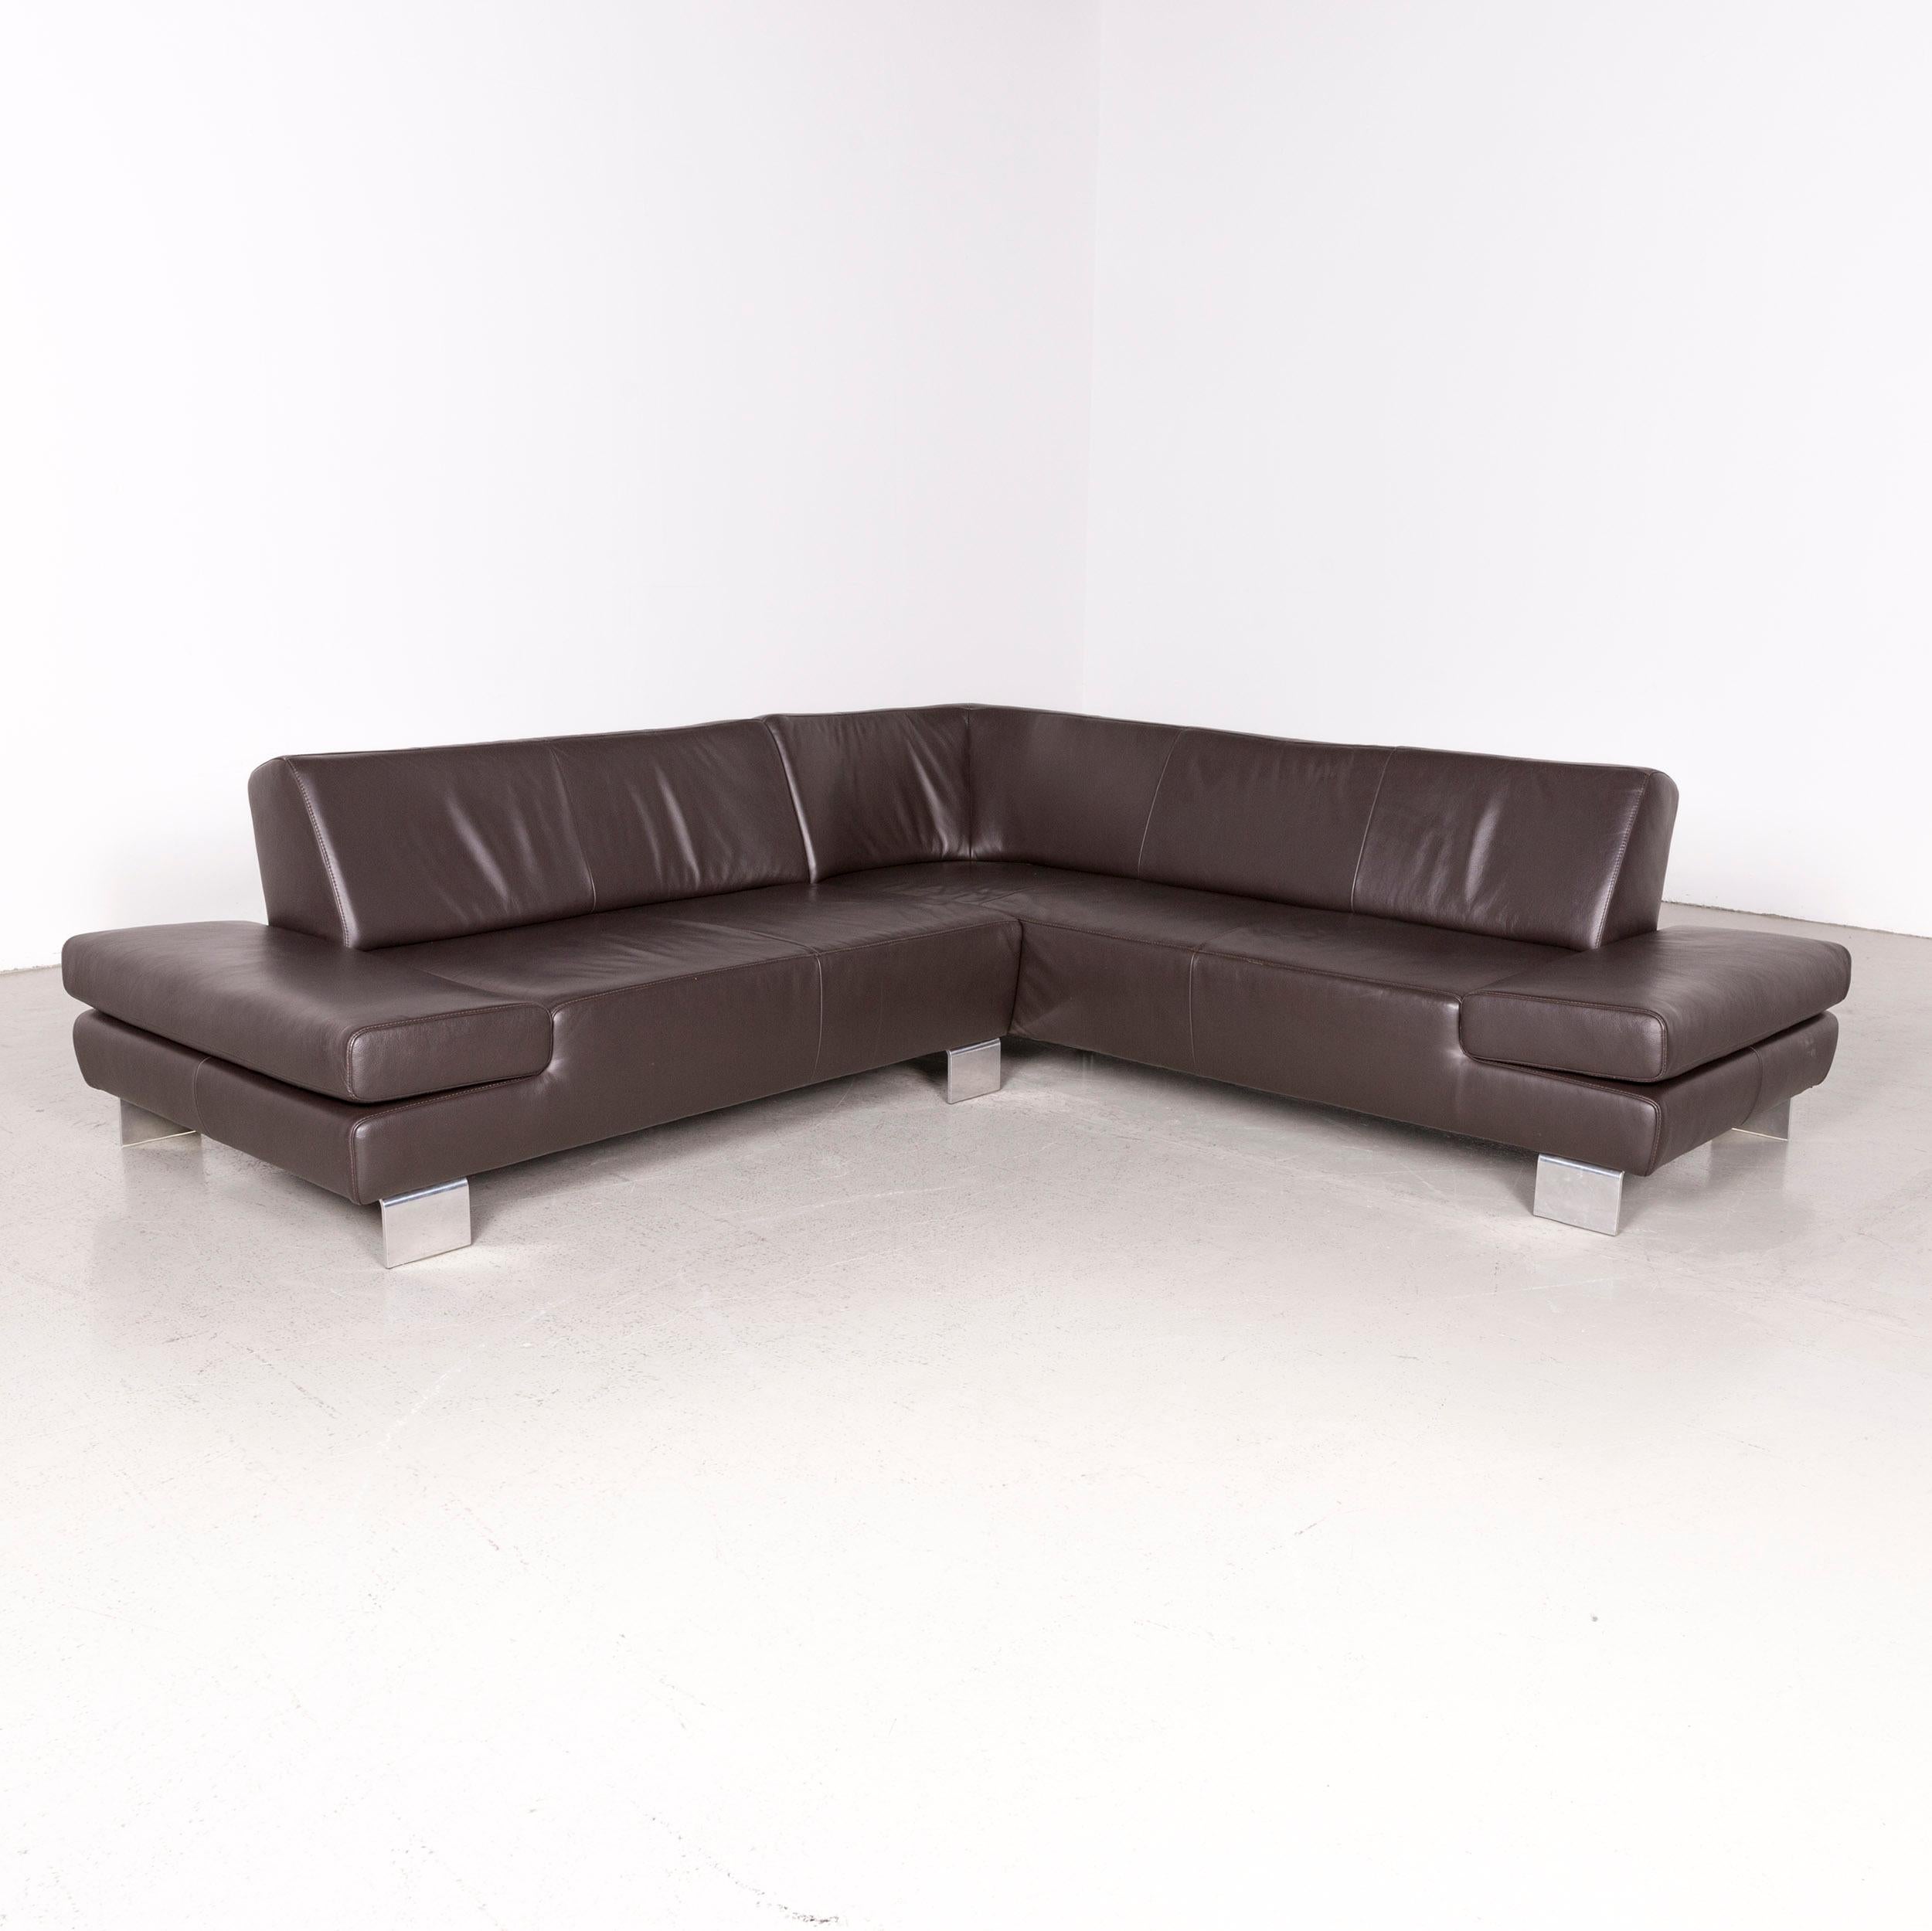 We bring to you a Willi Schillig Taboo designer leather corner sofa brown genuine leather couch.
 

Product measures in centimeters:

Depth: 90
Width: 250
Height: 75
Seat-height: 40
Rest-height: 70
Seat-depth: 60
Seat-width: